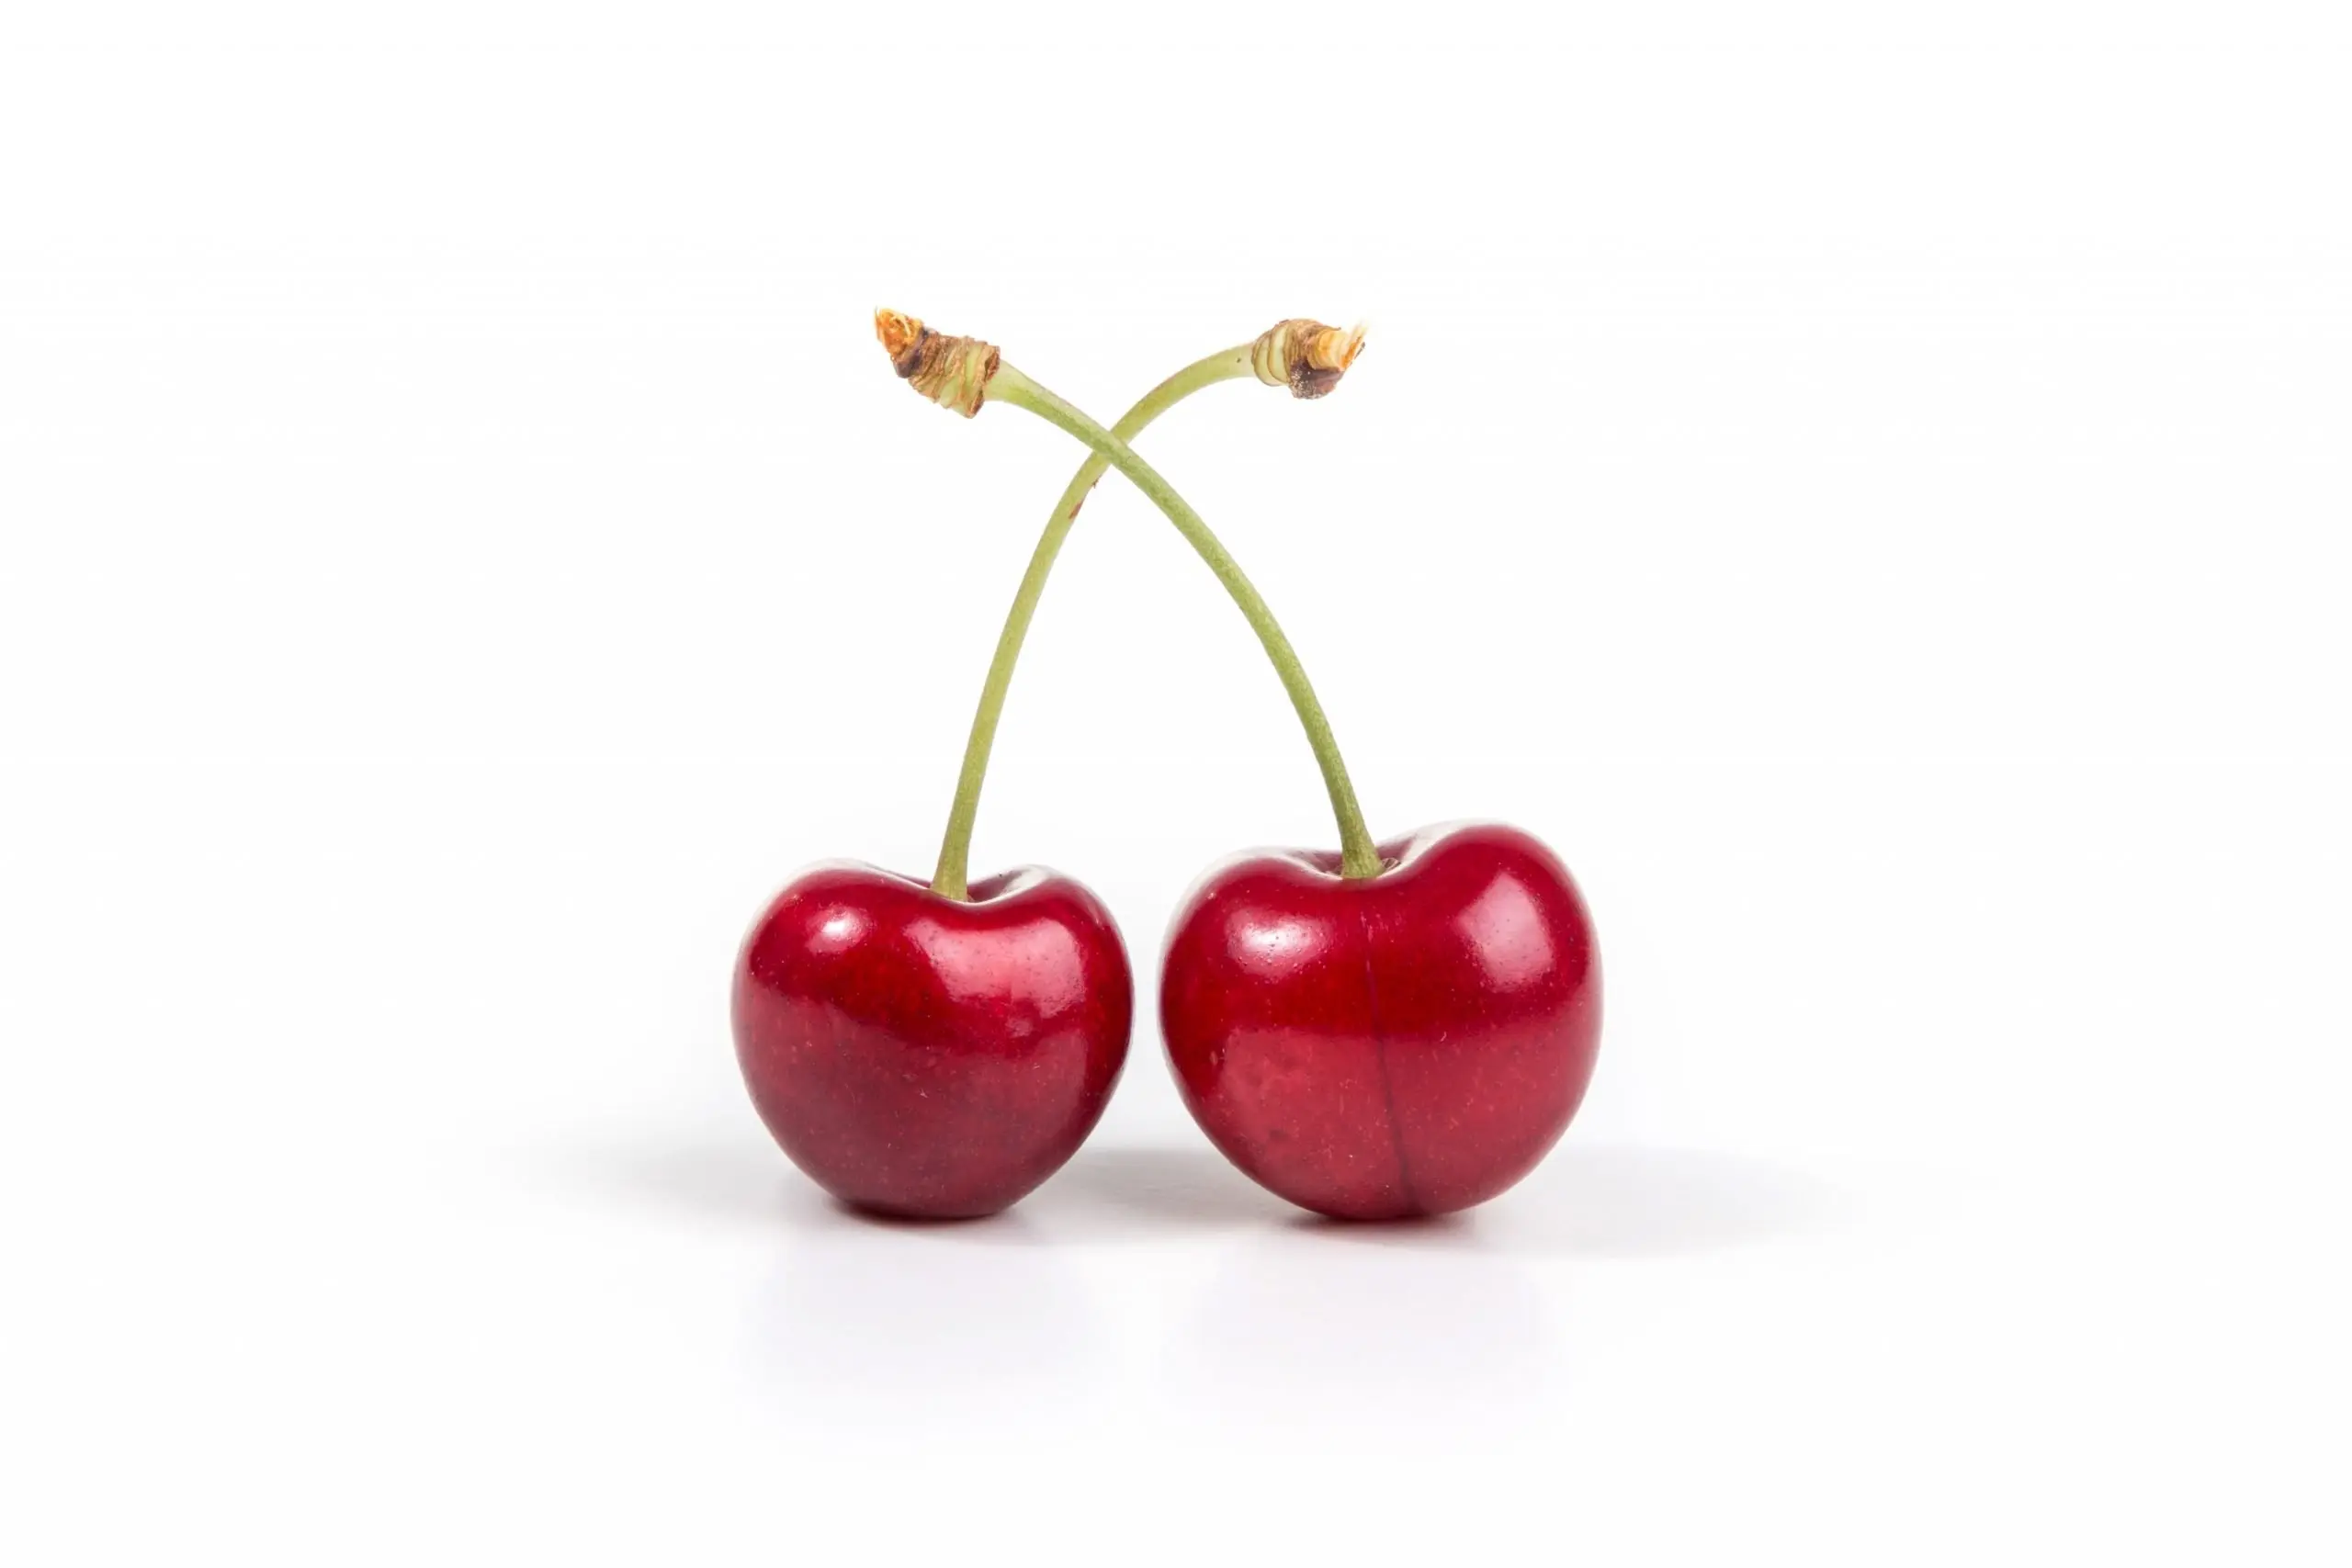 Nutritional science - cherries - Dominique Ludwig